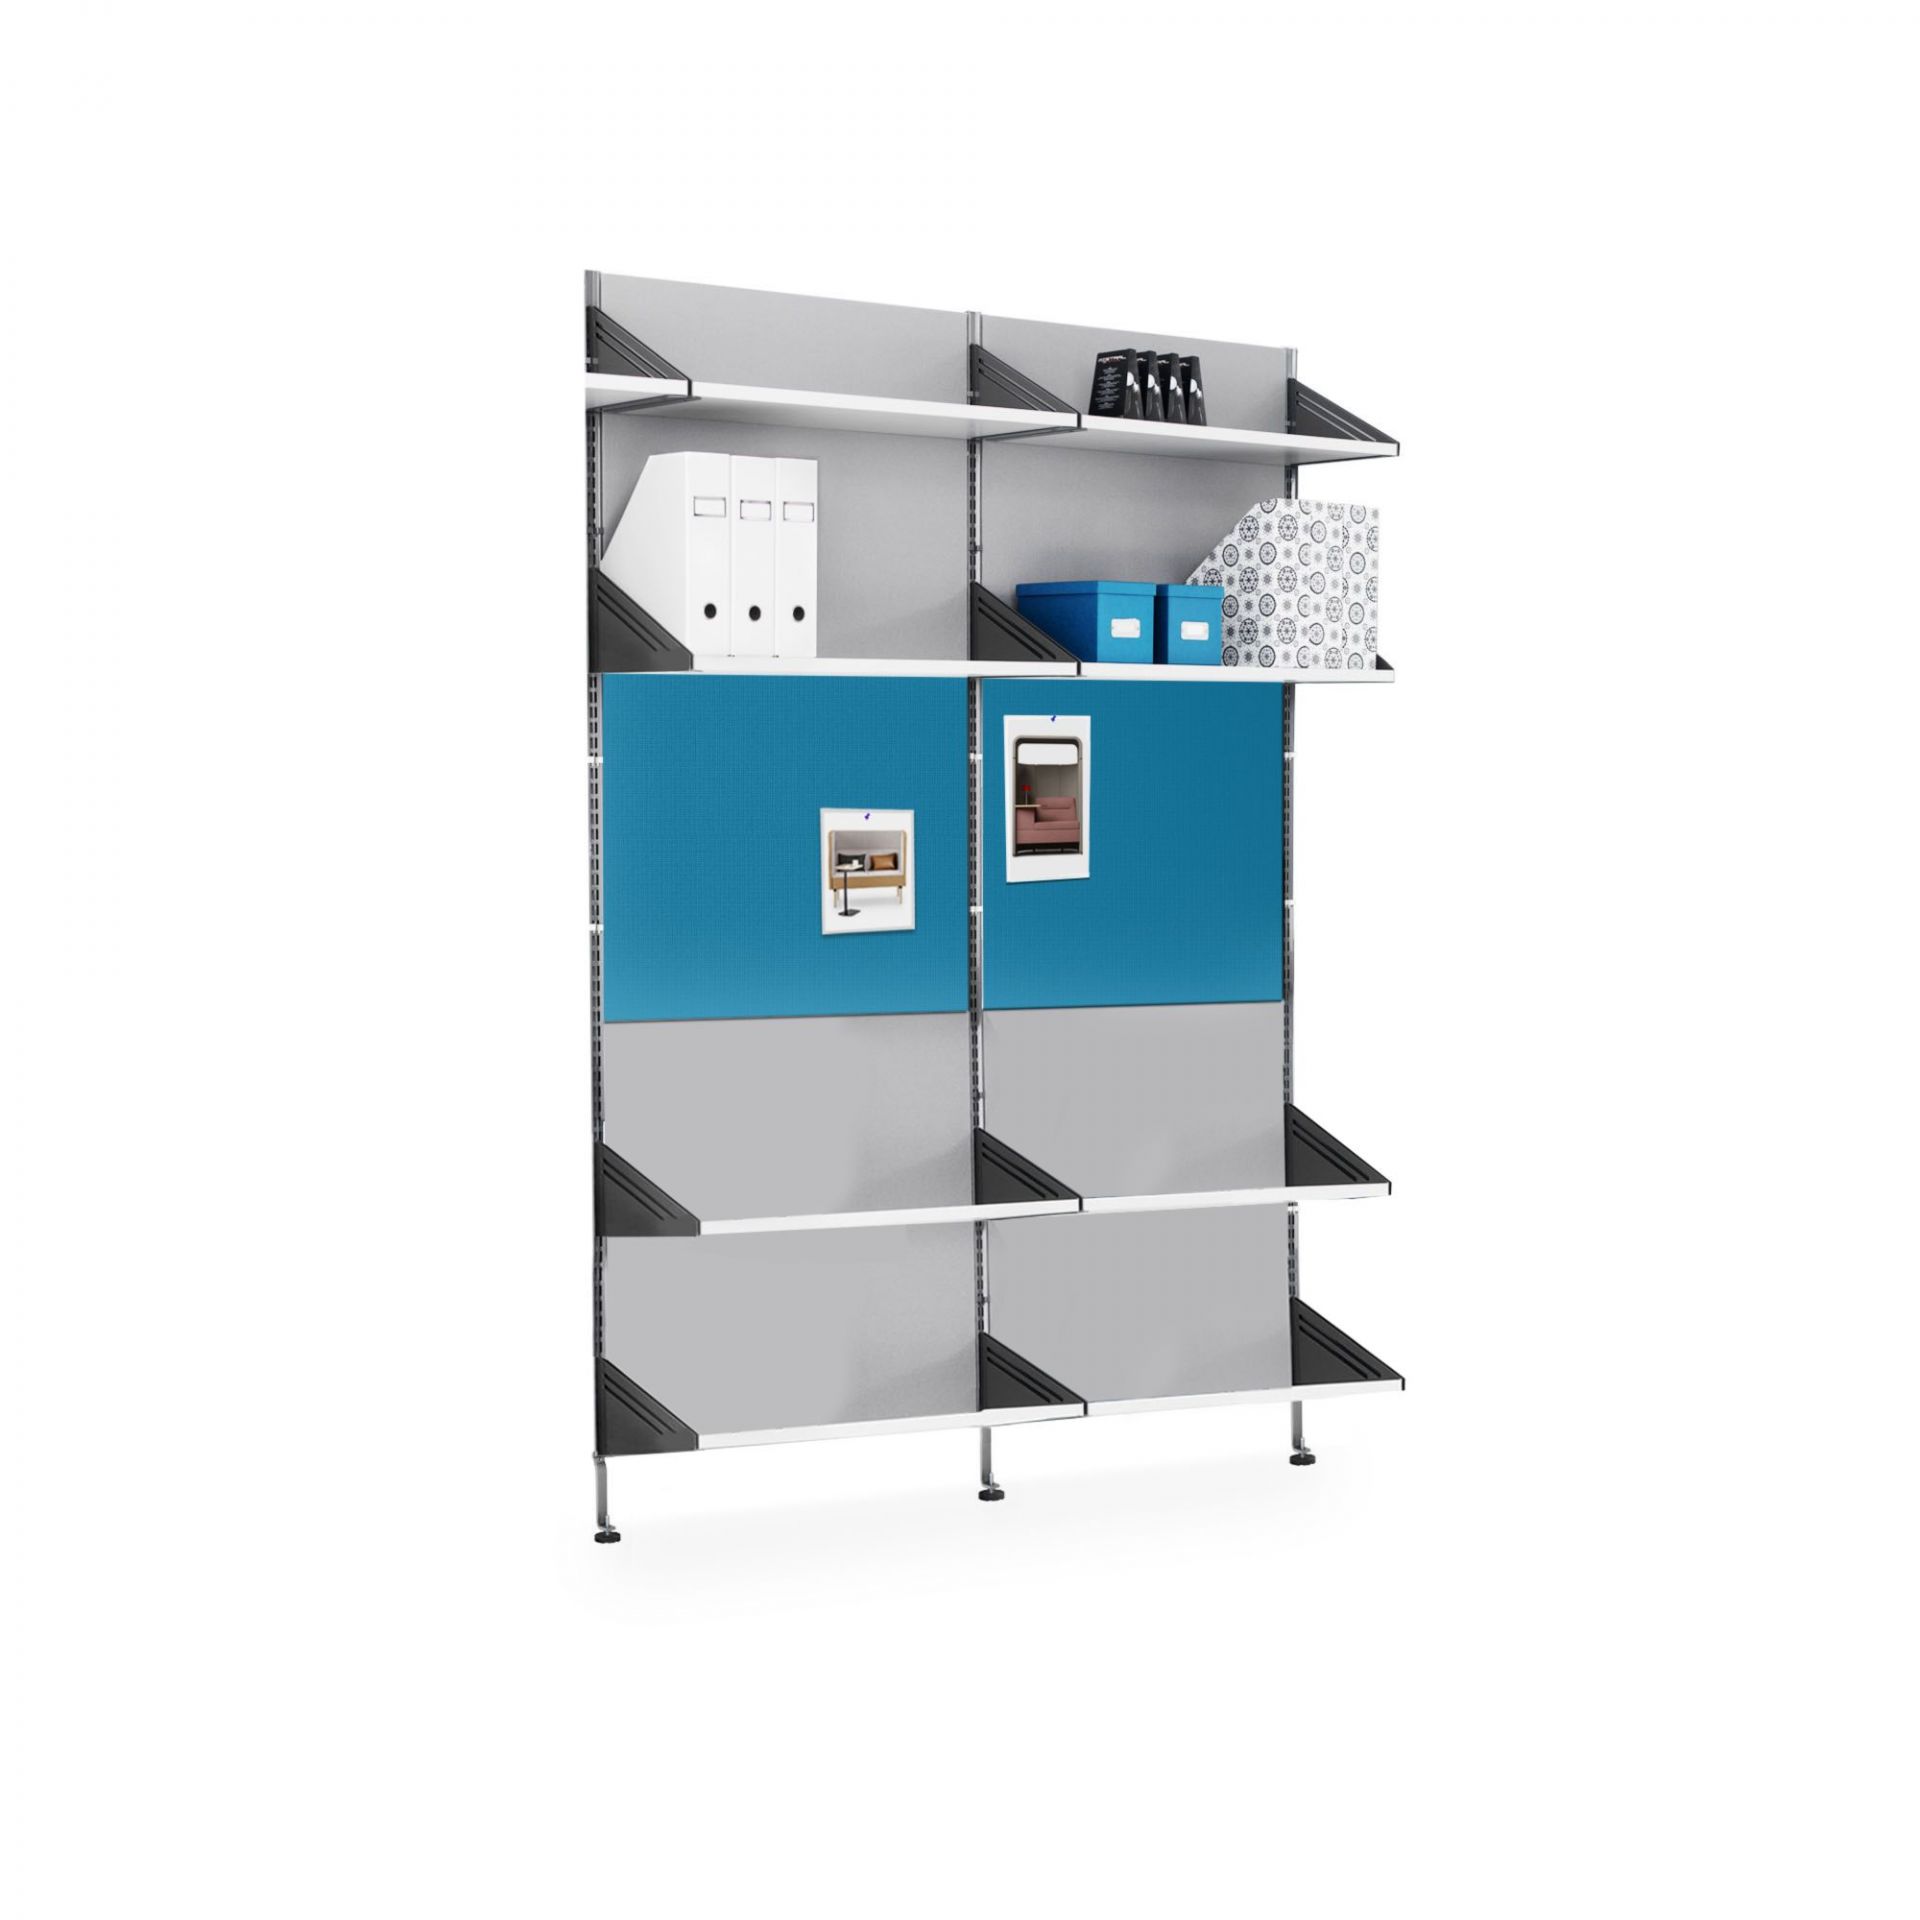 Team Pro Wall Wall-mounted storage system